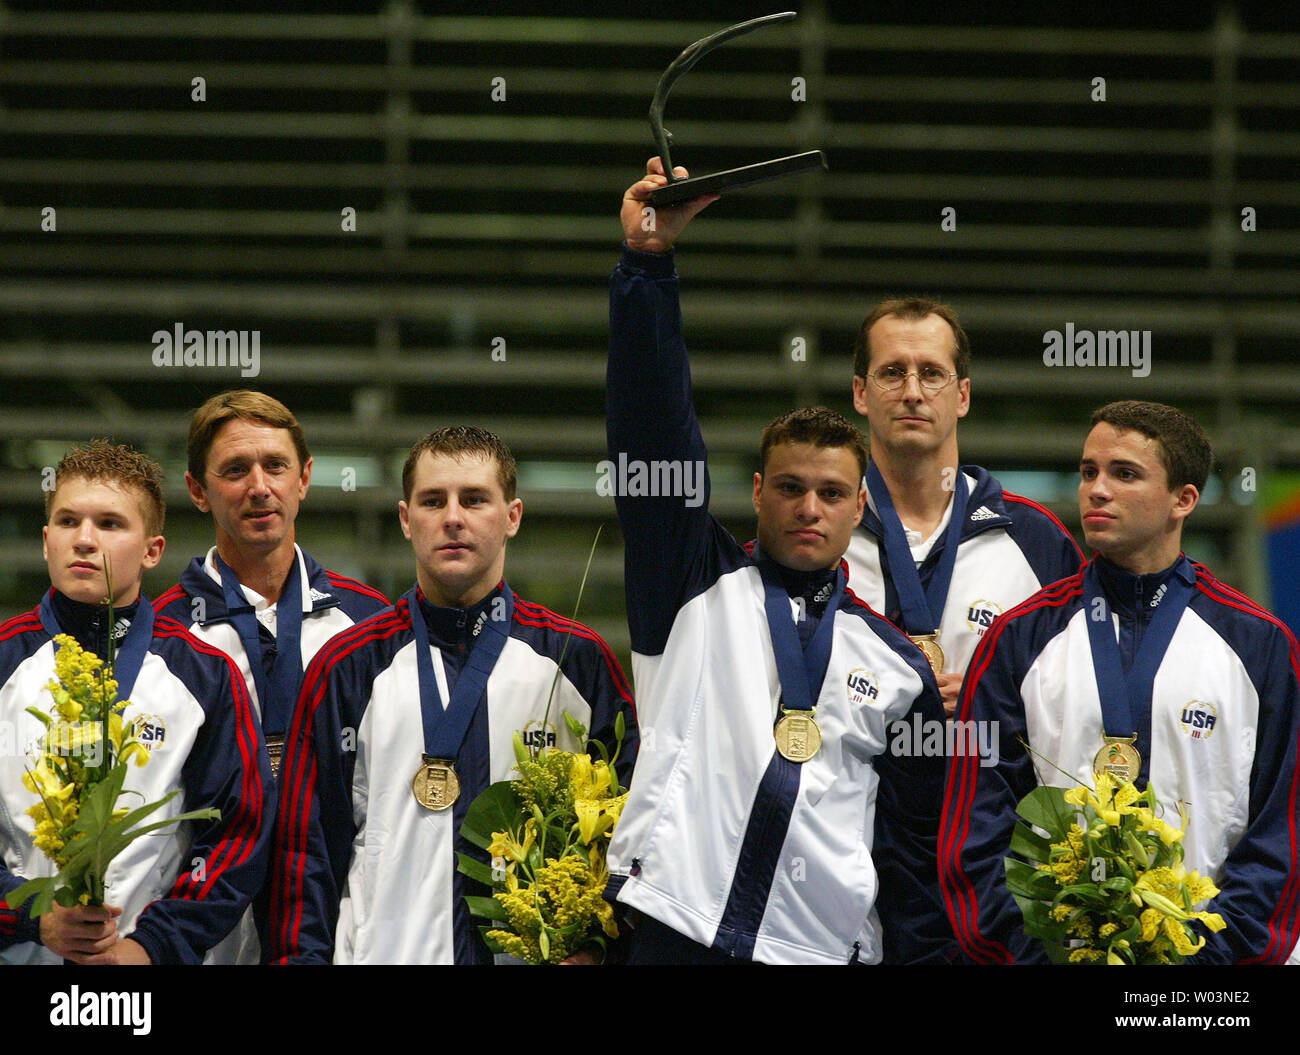 The American men's gymnastics squad celebrates their victory in the team competition of the Pan American Gymnastics Championships in Rio de Janeiro, Brazil on October 8, 2005. The team (from left) of Jonathan Horton, Mark Williams (coach), Joseph Hagerty, David Durante, Mike Burns (coach), and Guillermo Alvarez claimed the gold medal ahead of Puerto Rico and Canada.  (UPI Photo / Grace Chiu) Stock Photo